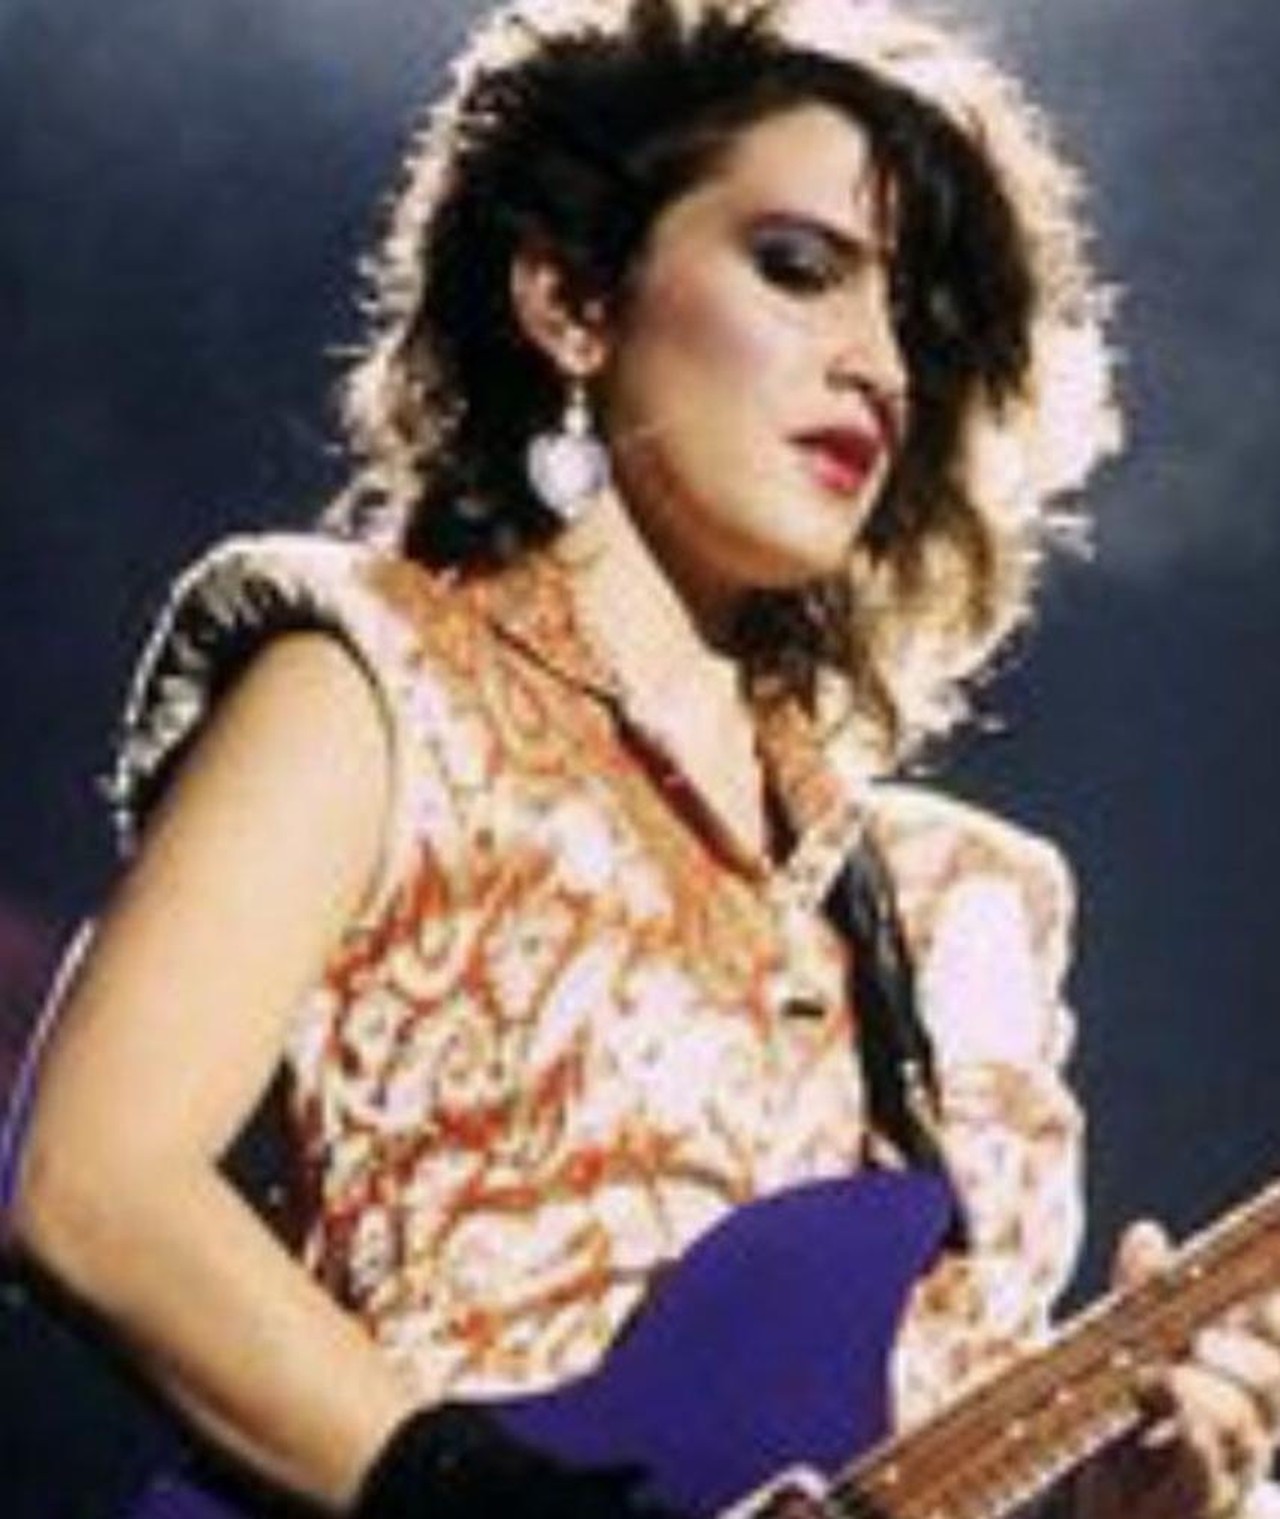 Photo of Wendy Melvoin